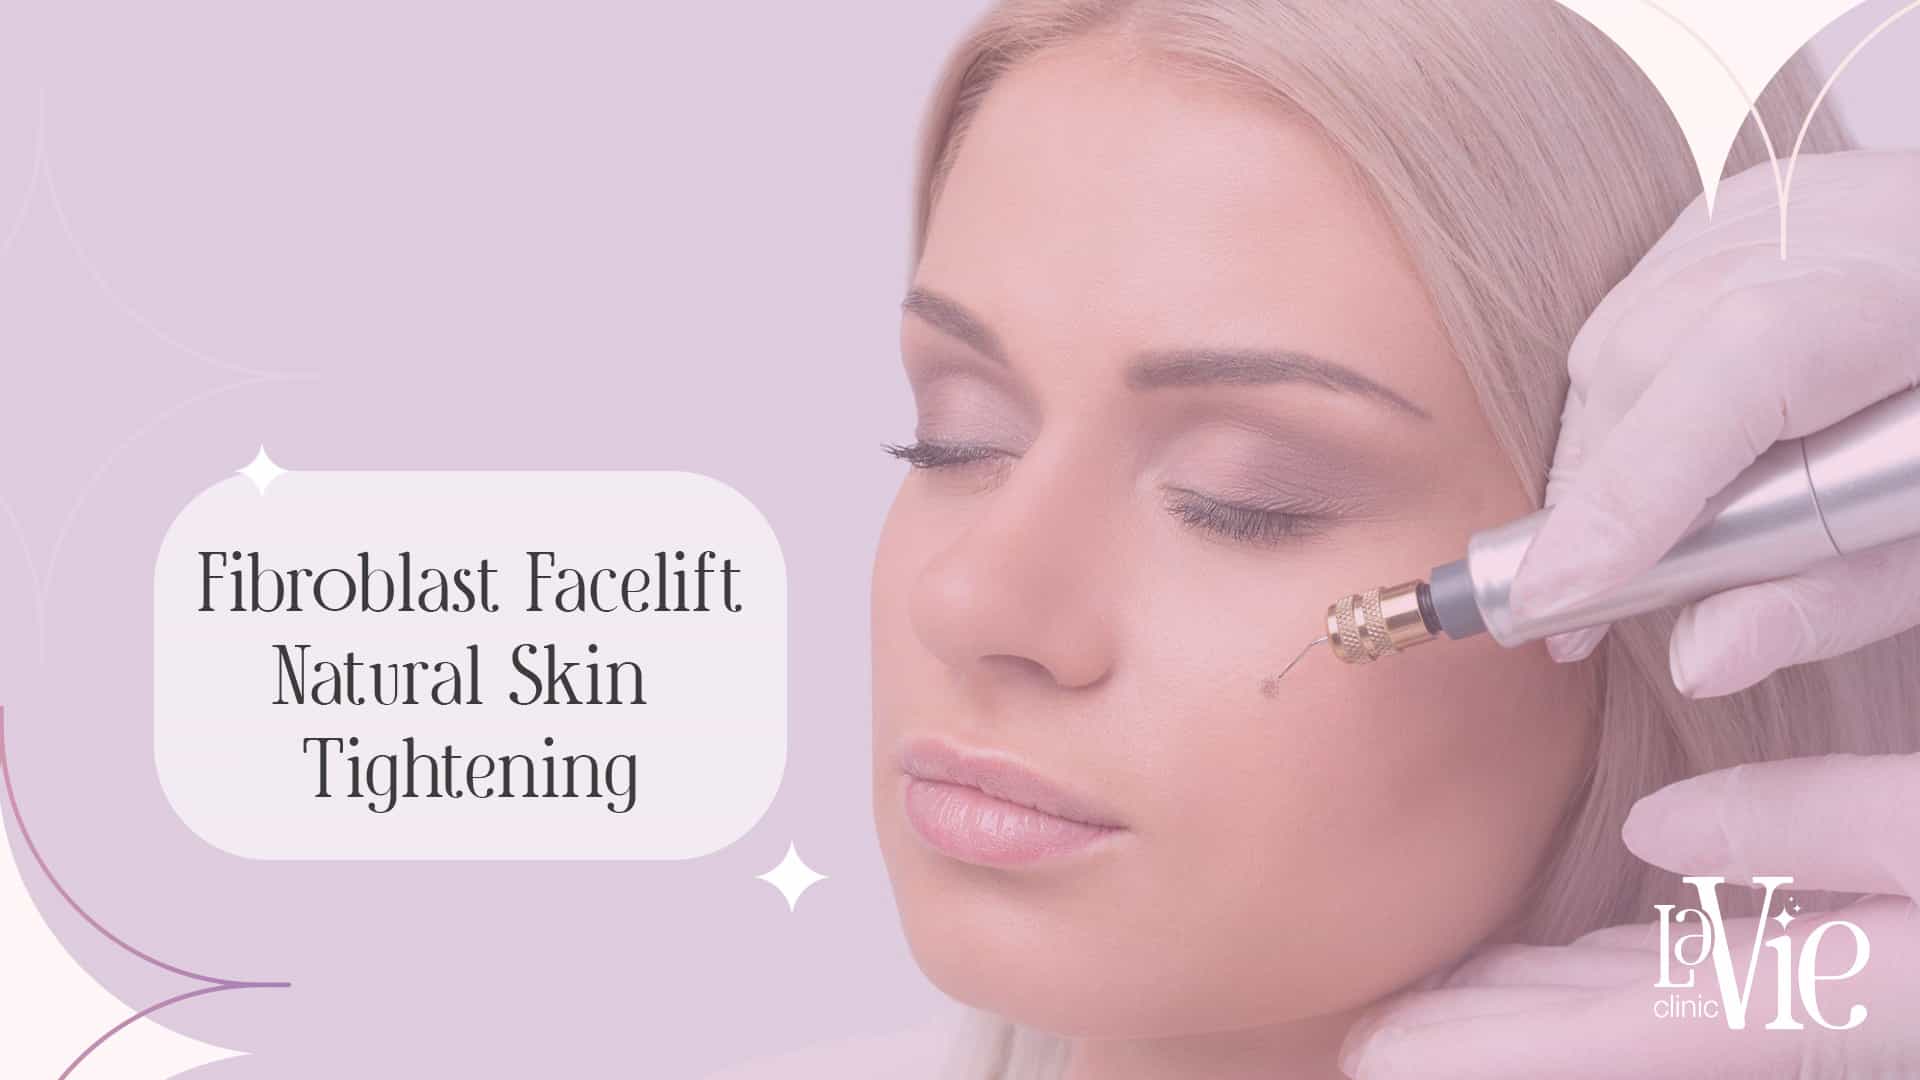 Non Surgical Facelift Rochester Hills: Natural Skin Tightening